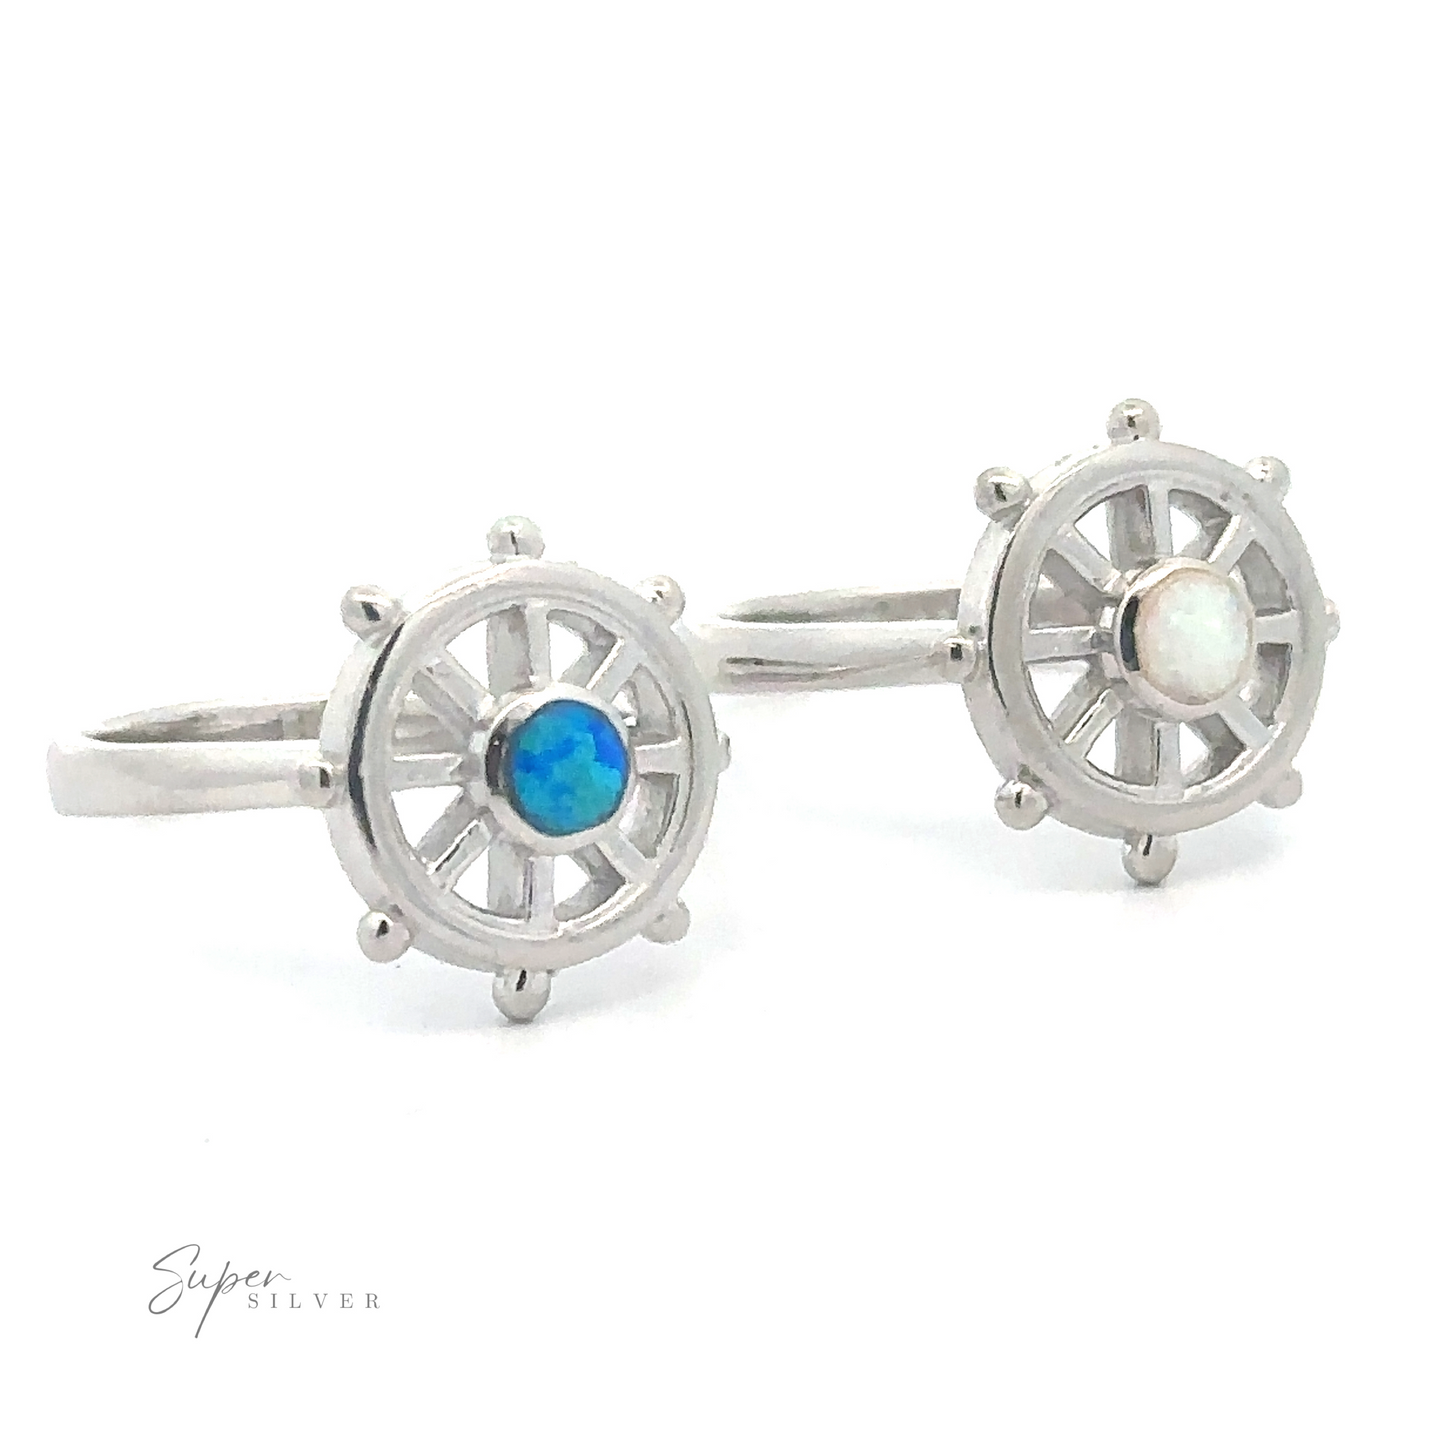 Silver ship wheel ring-shaped earrings with lab opal stones at their centers.